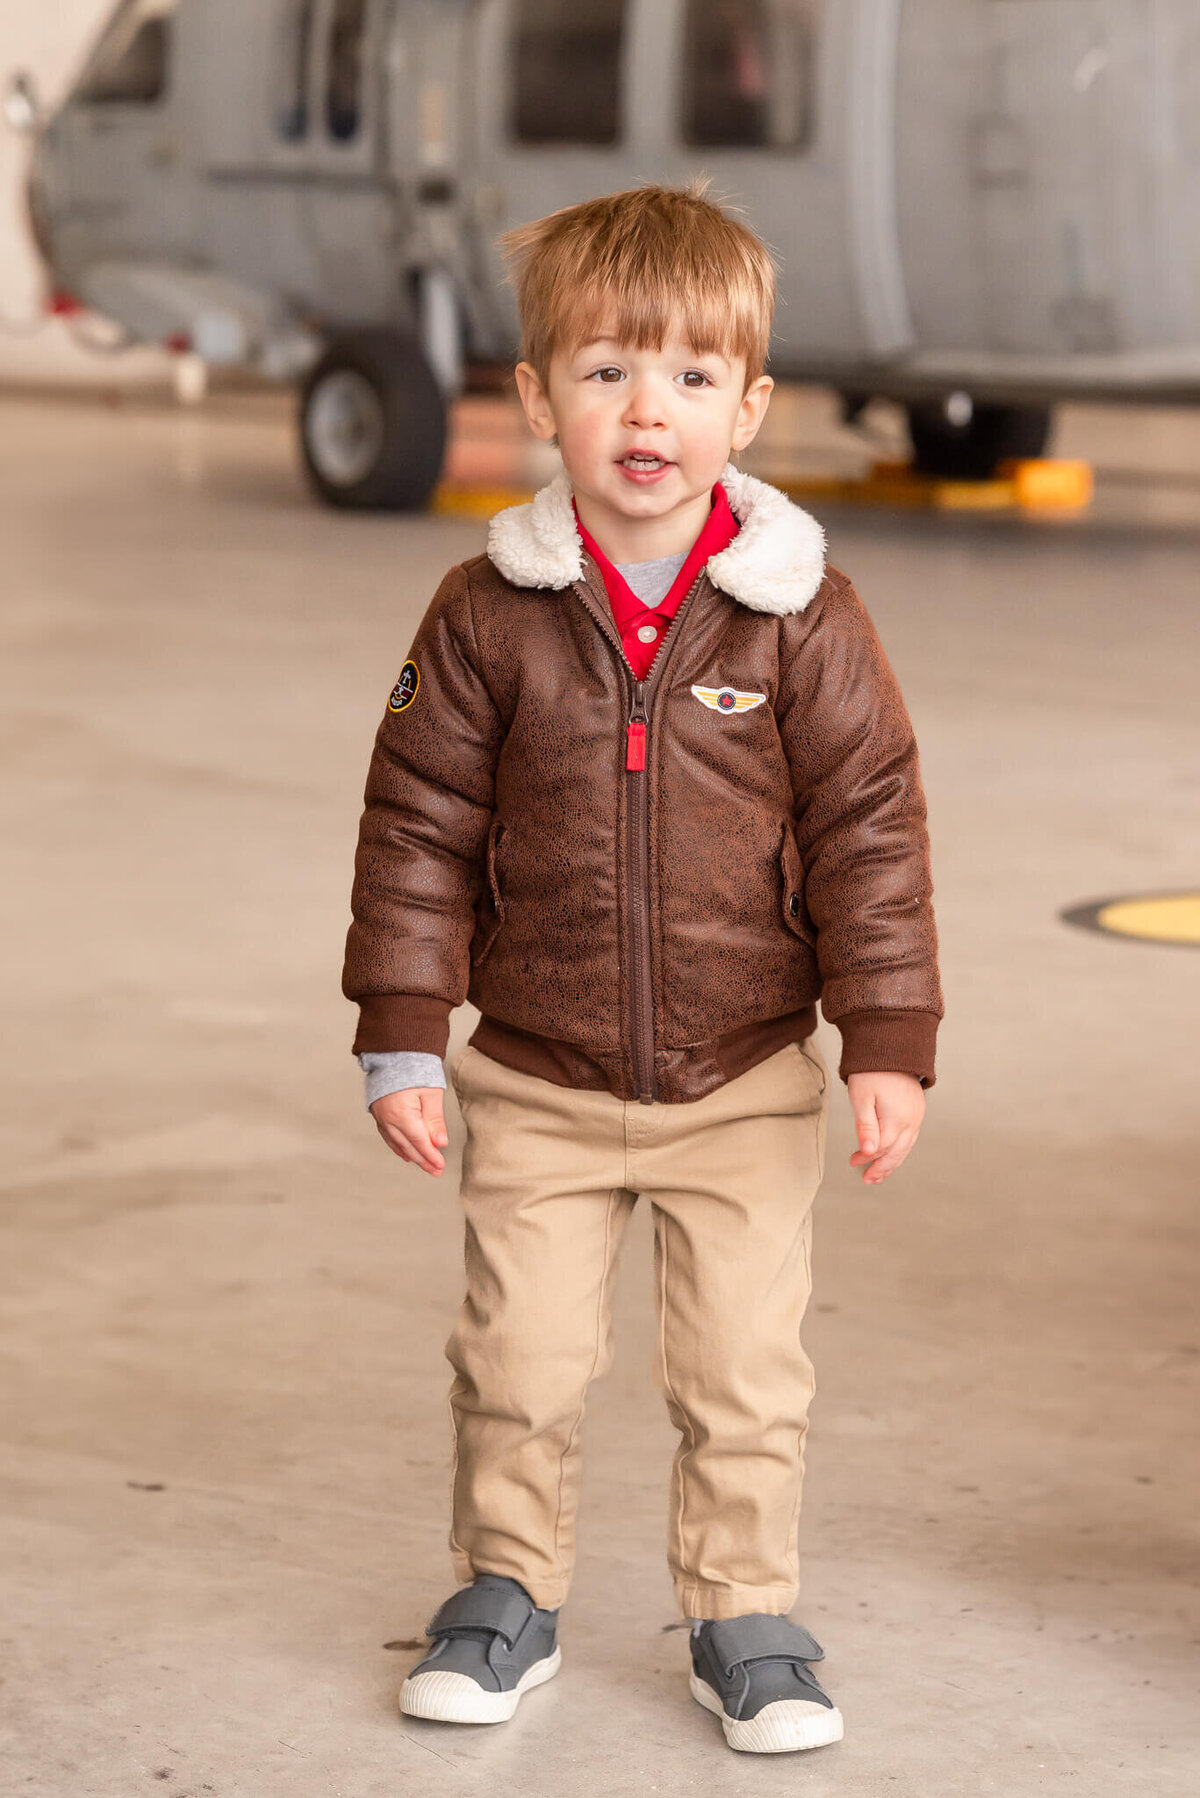 A young boy, wearing a top gun style flight jacket, waits for his dad to come home at a military homecoming.